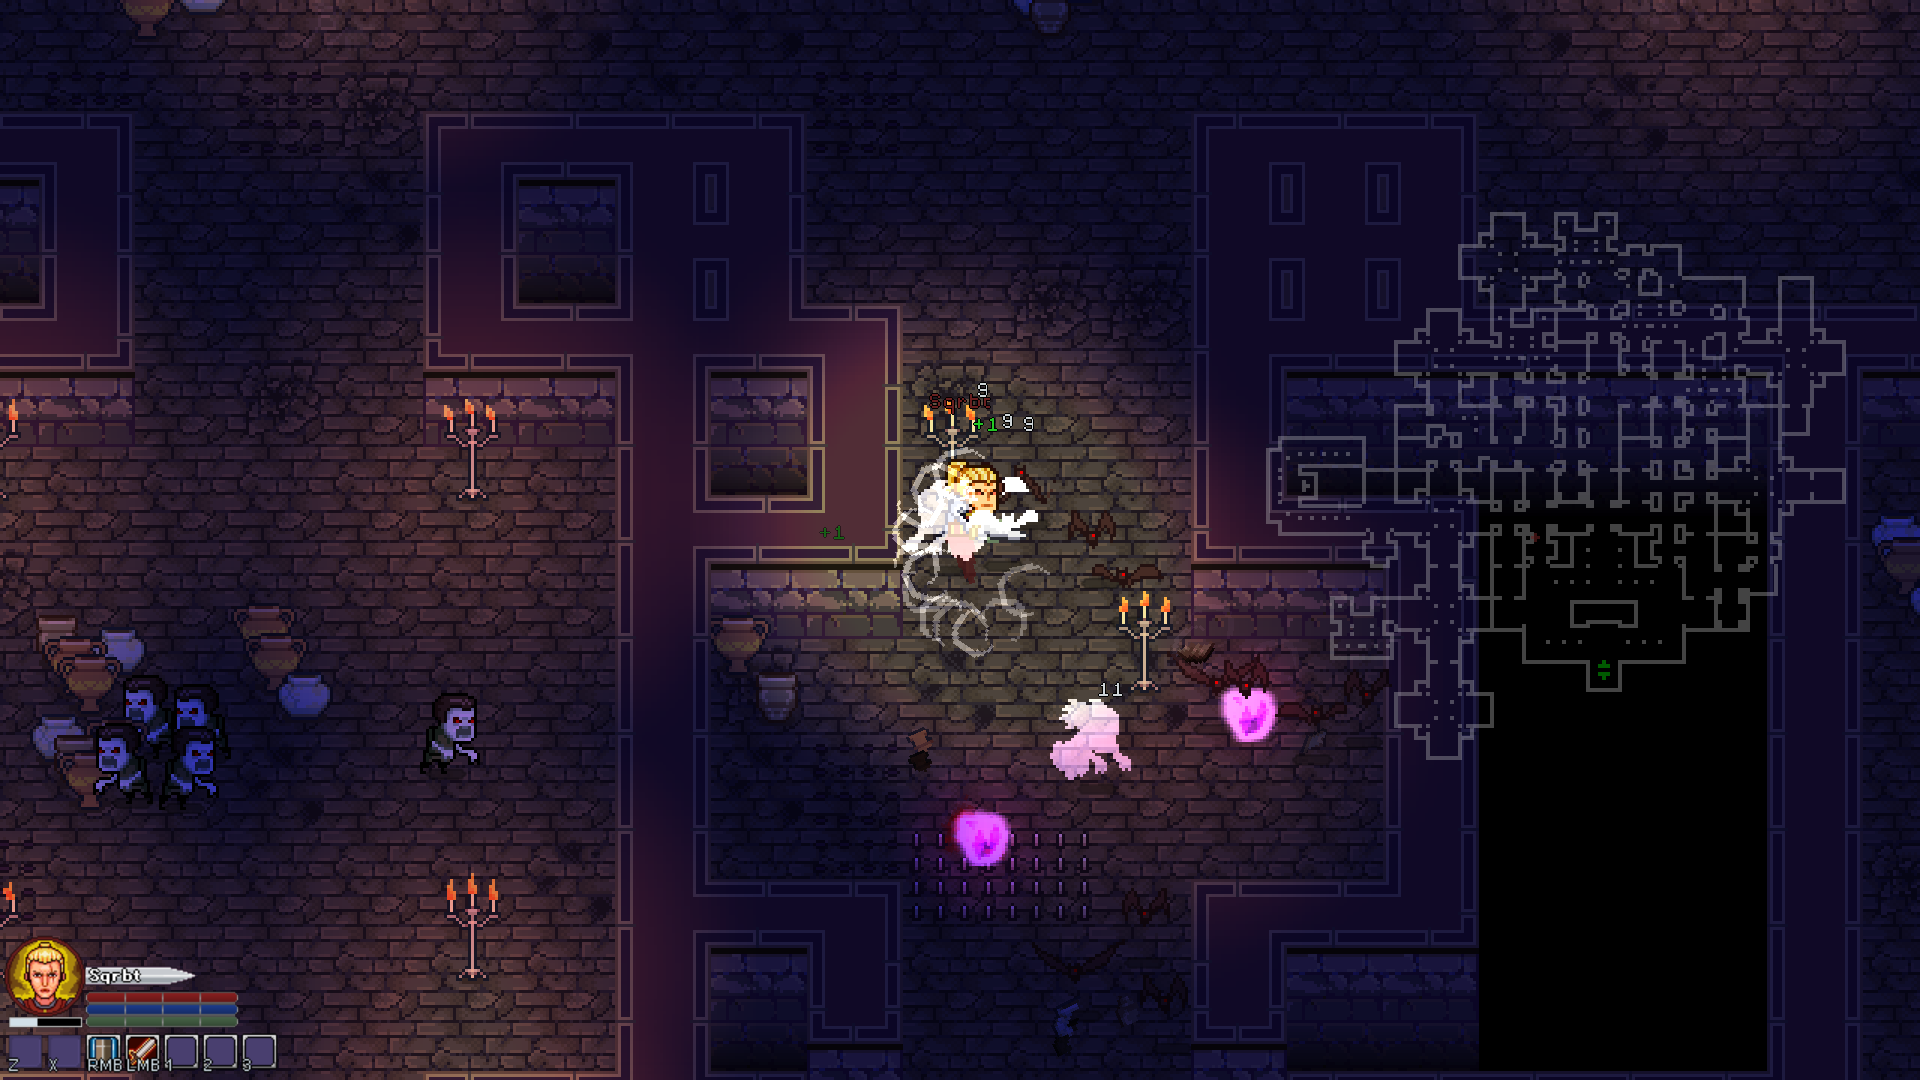 In-game dungeon, with the minimap showing the generated layout